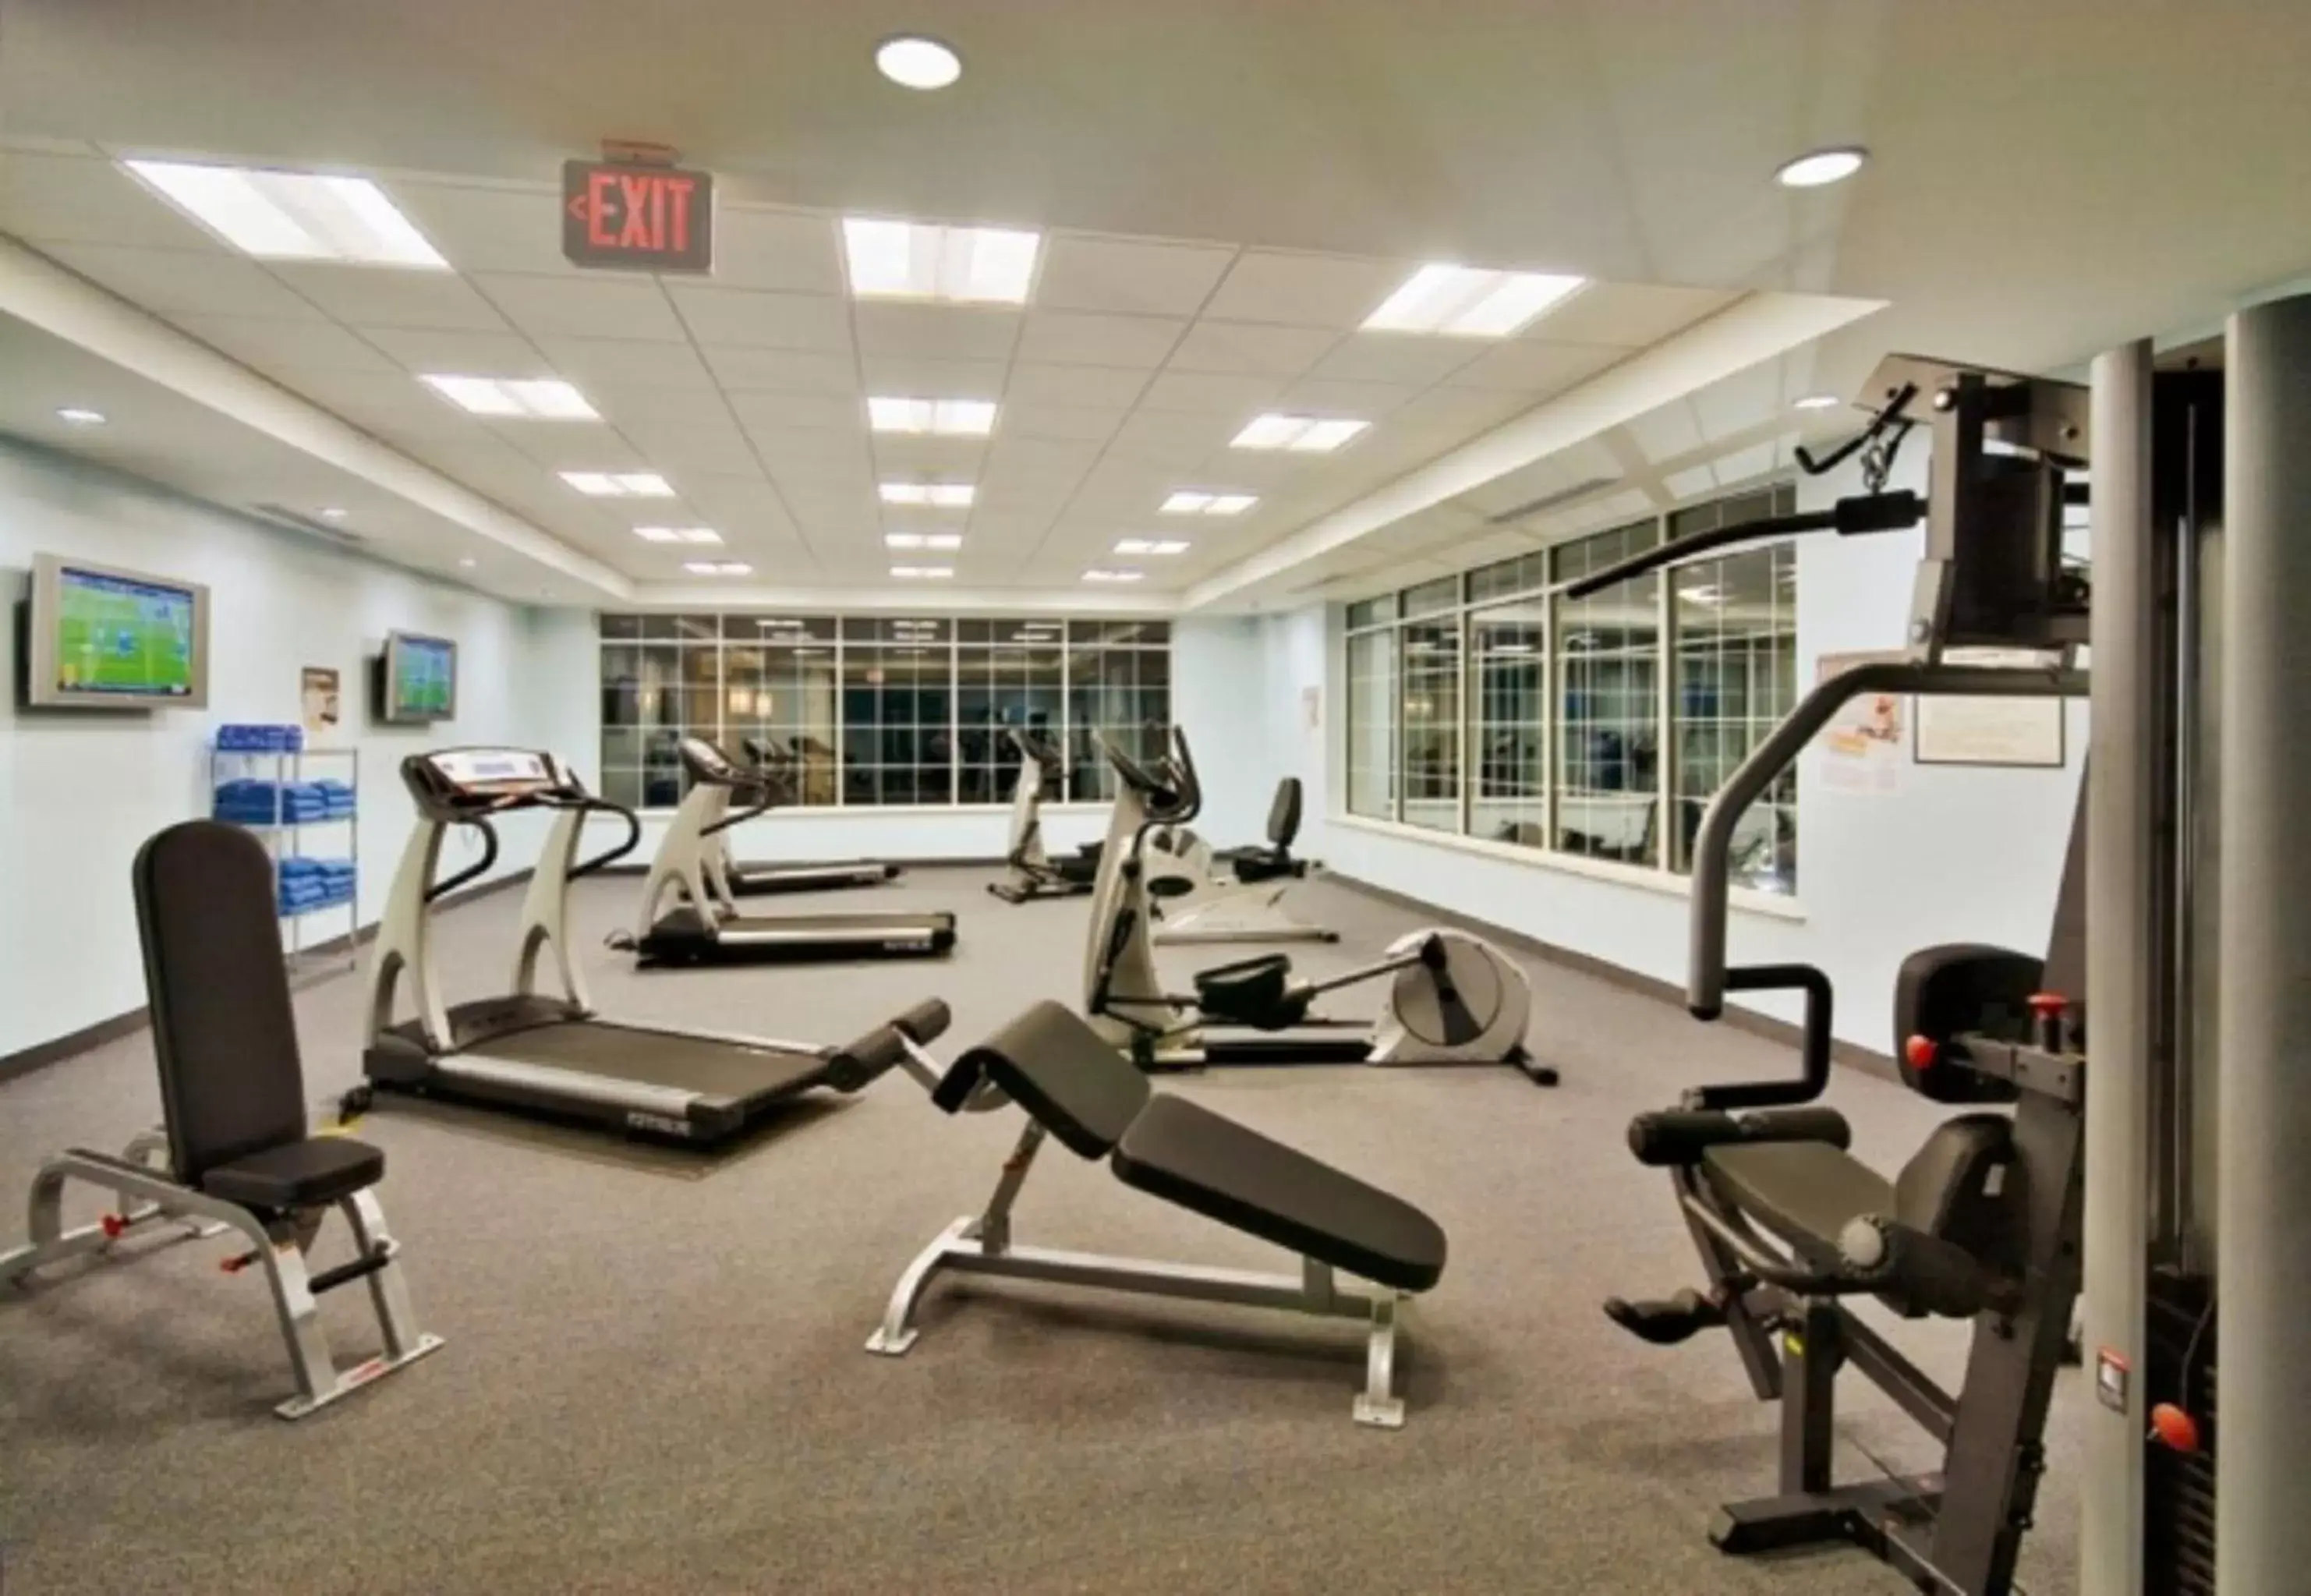 Fitness centre/facilities, Fitness Center/Facilities in Wyndham Gettysburg